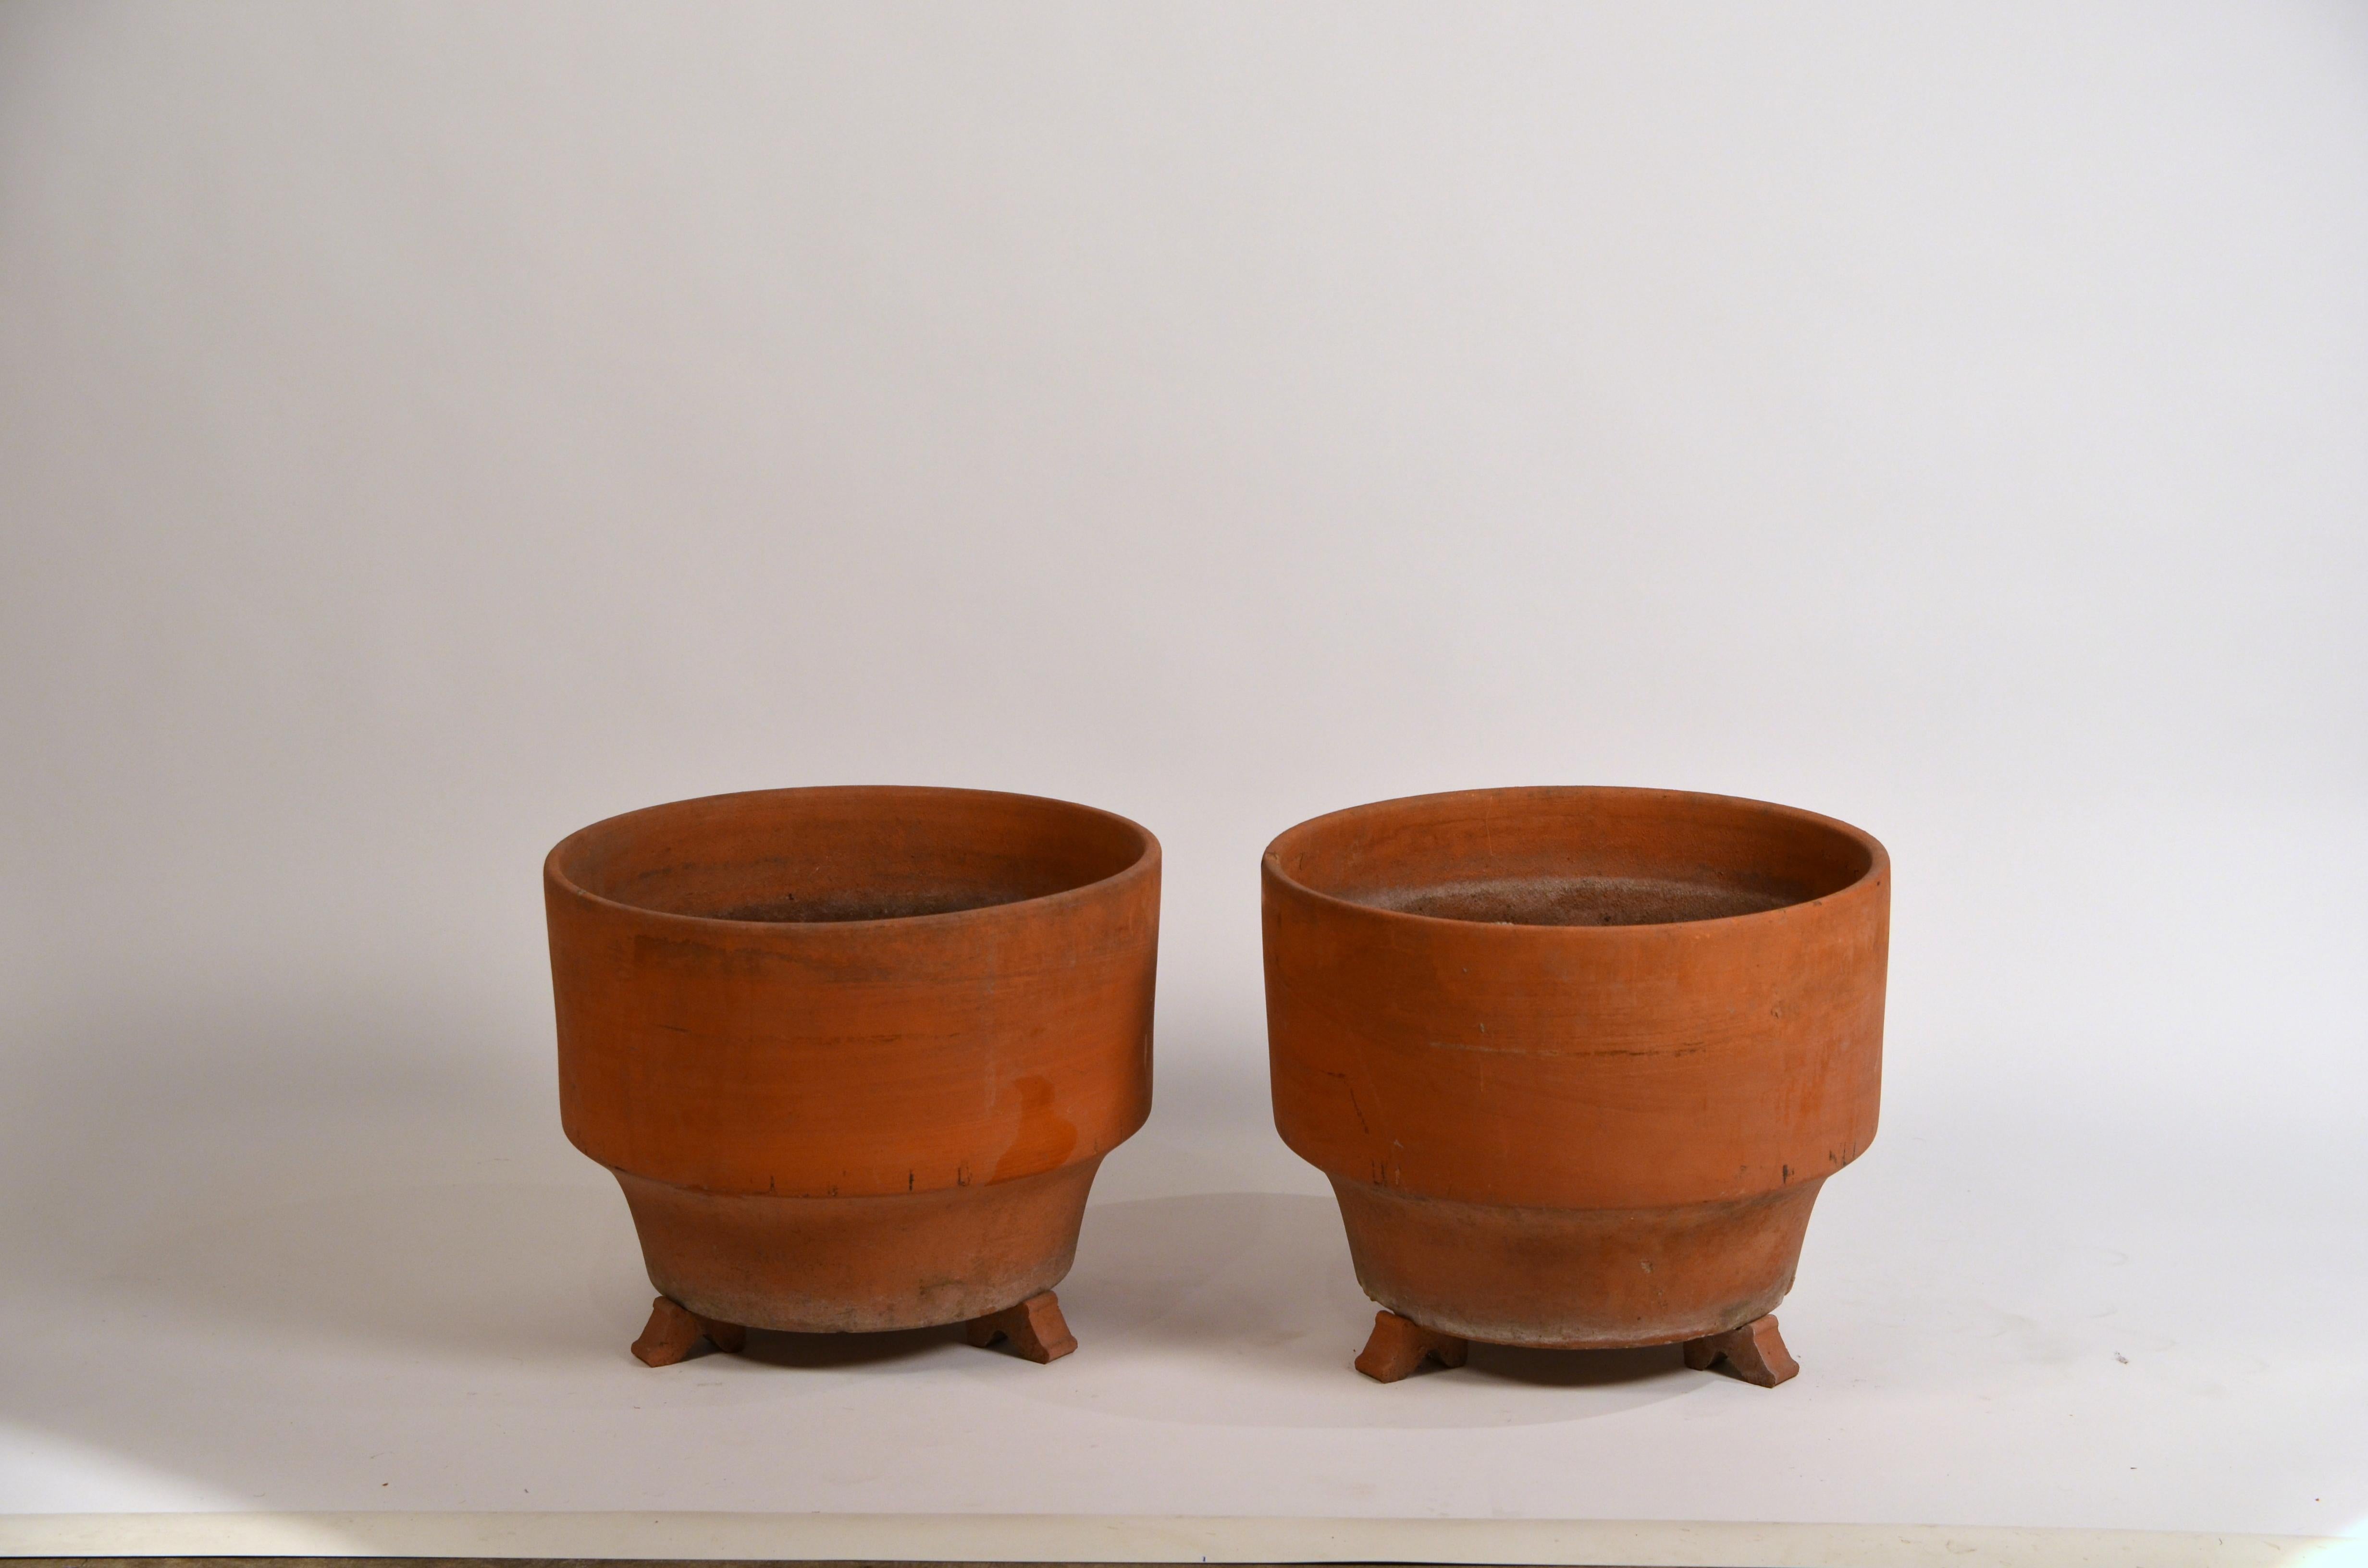 Pair of large midcentury unglazed terracotta planters on stands (optional).